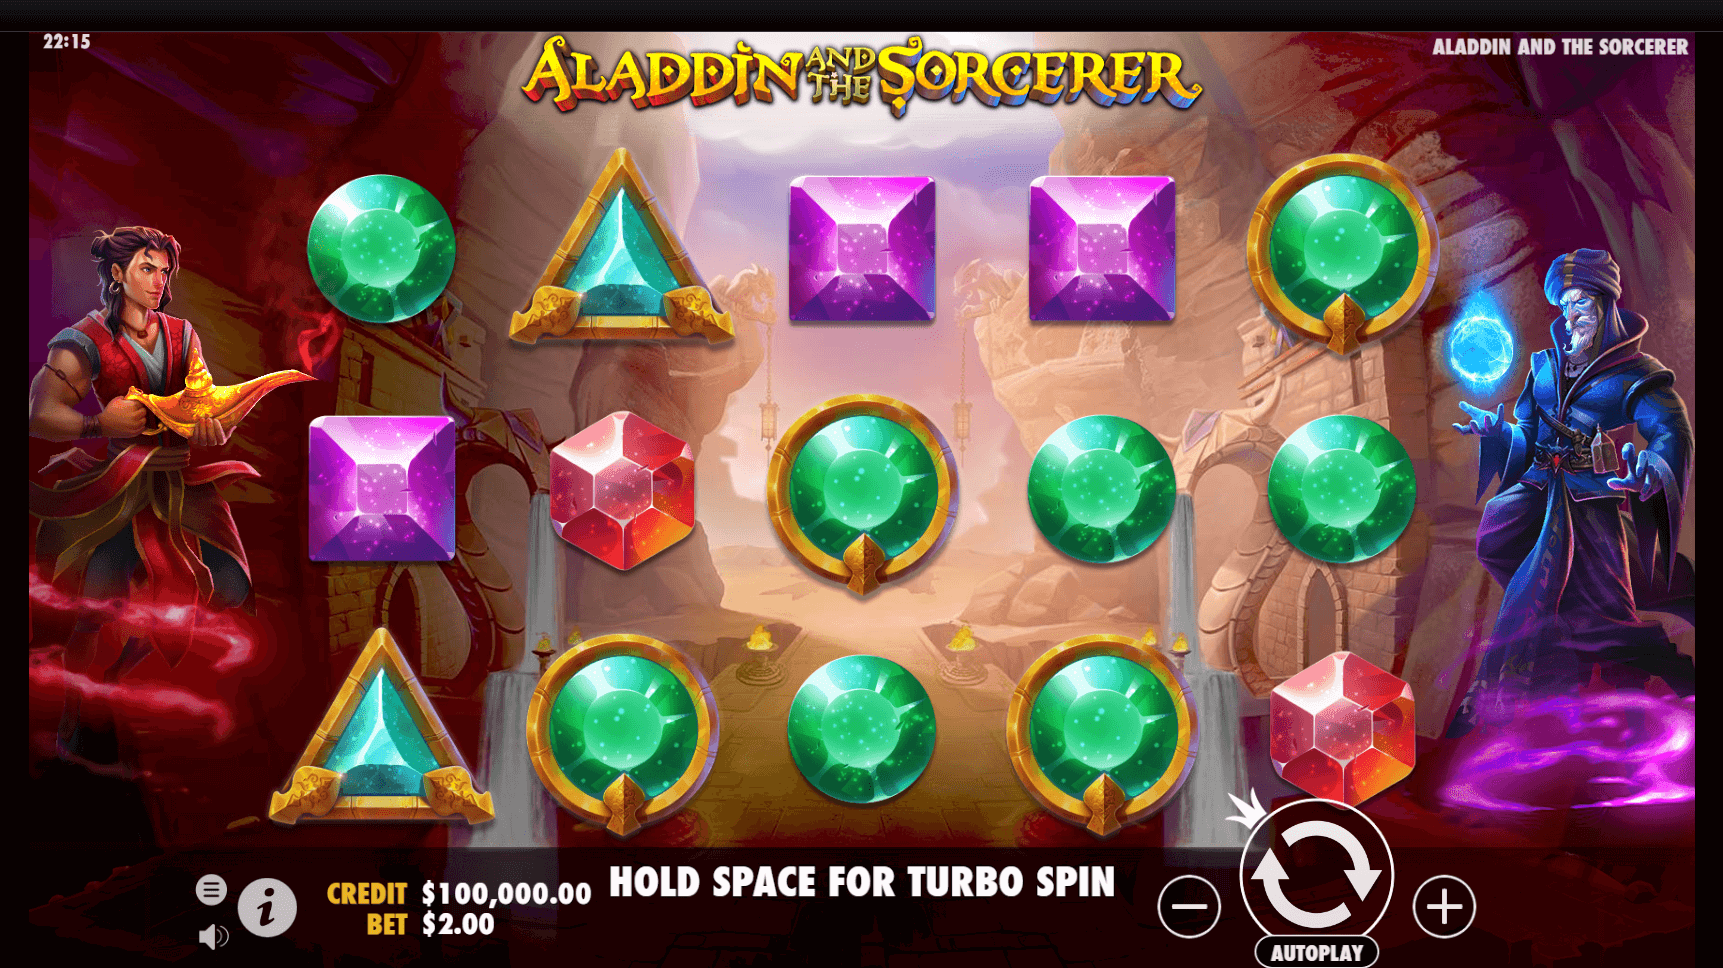 Aladdin and the Sorcerer slot play free